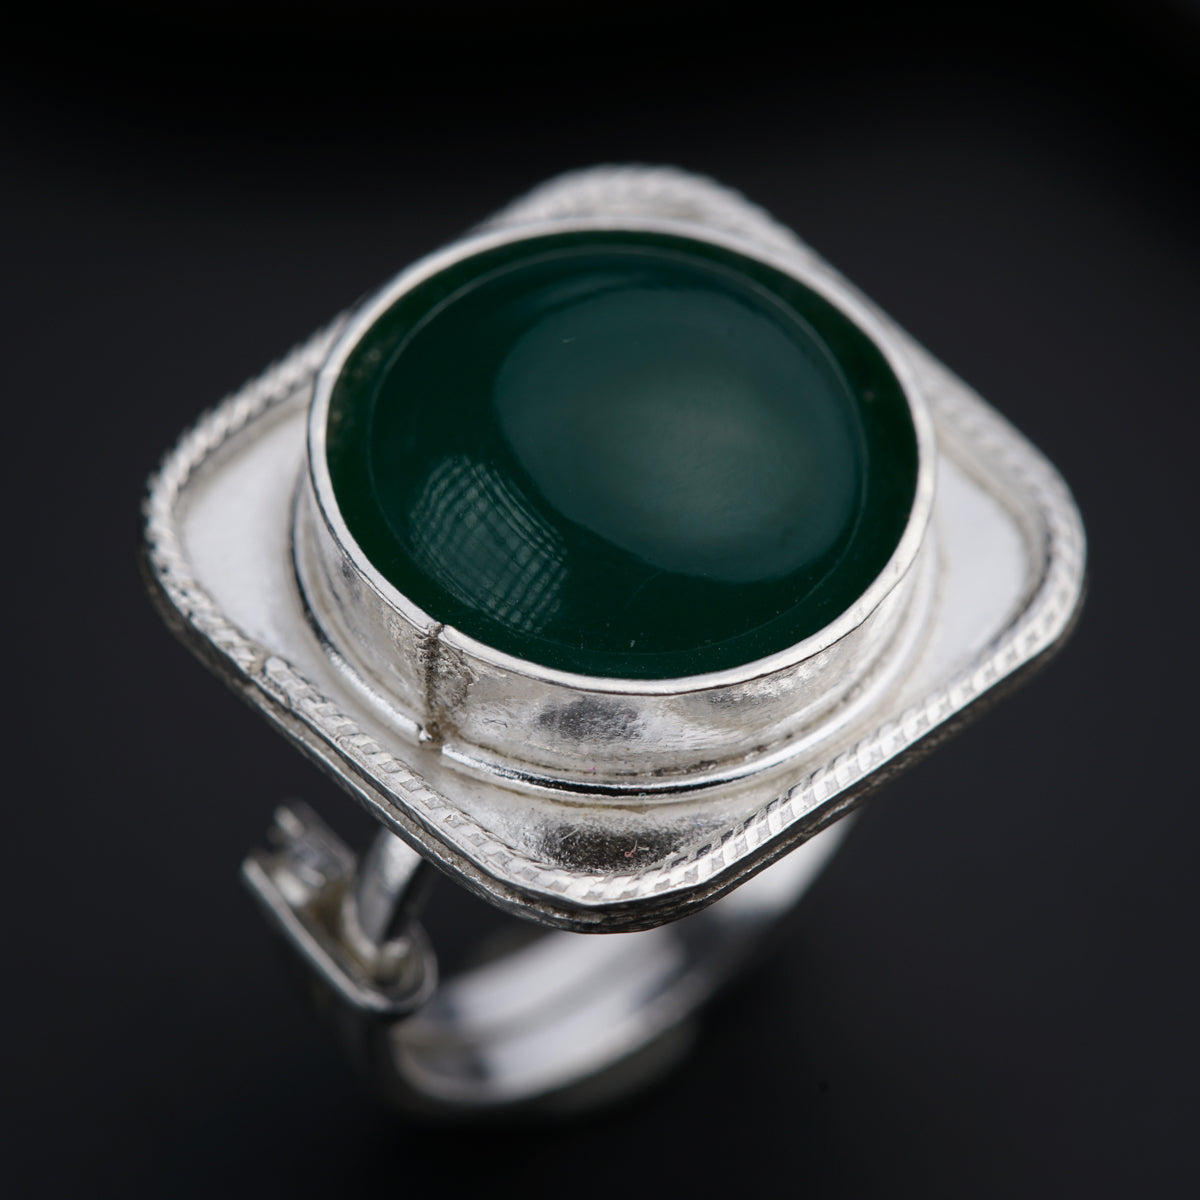 a close up of a green ring on a black surface